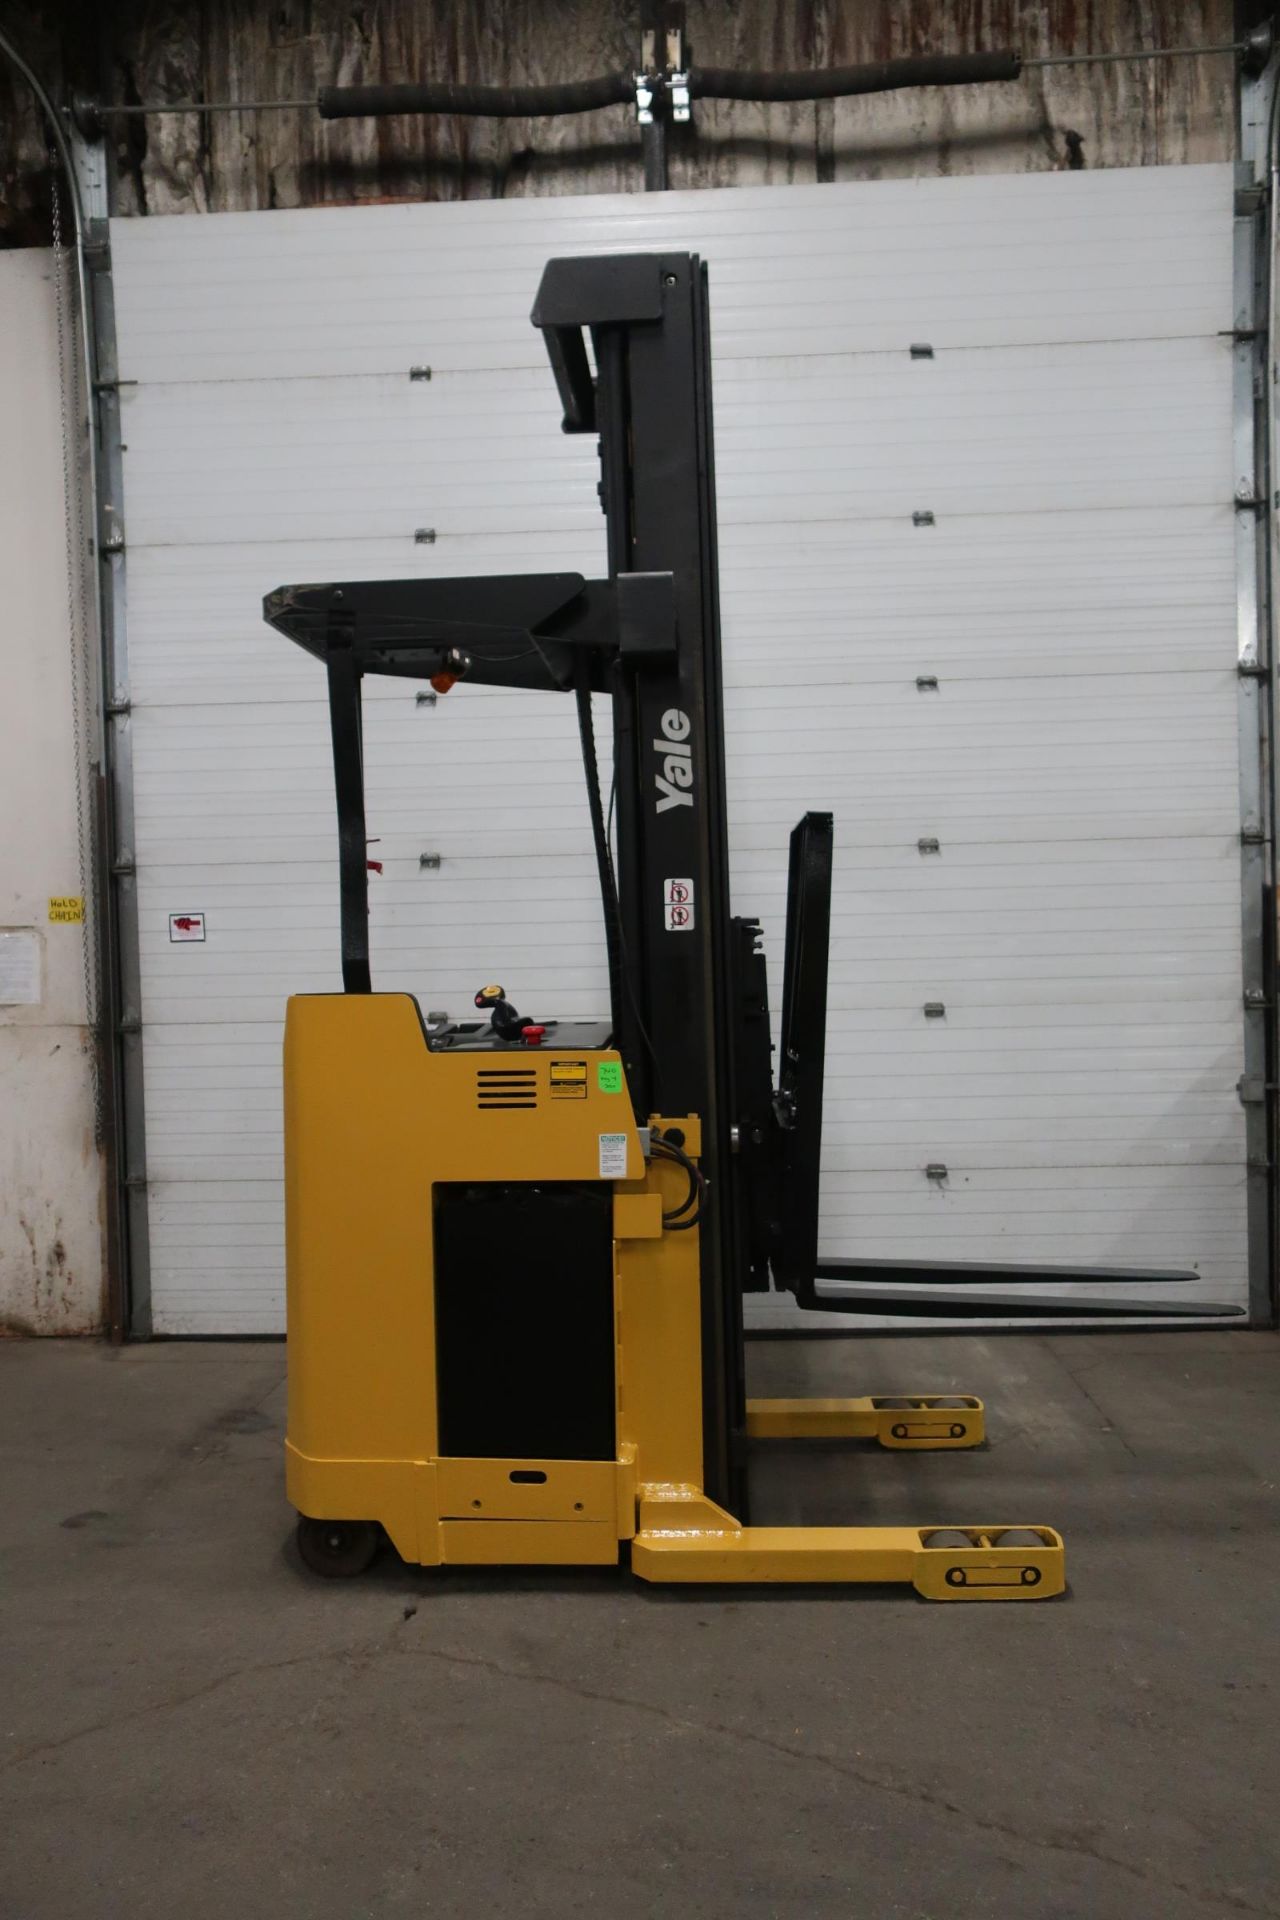 FREE CUSTOMS - 2005 Hyster Reach Truck Pallet Lifter with LOW HOURS and 3-stage ELECTRIC with